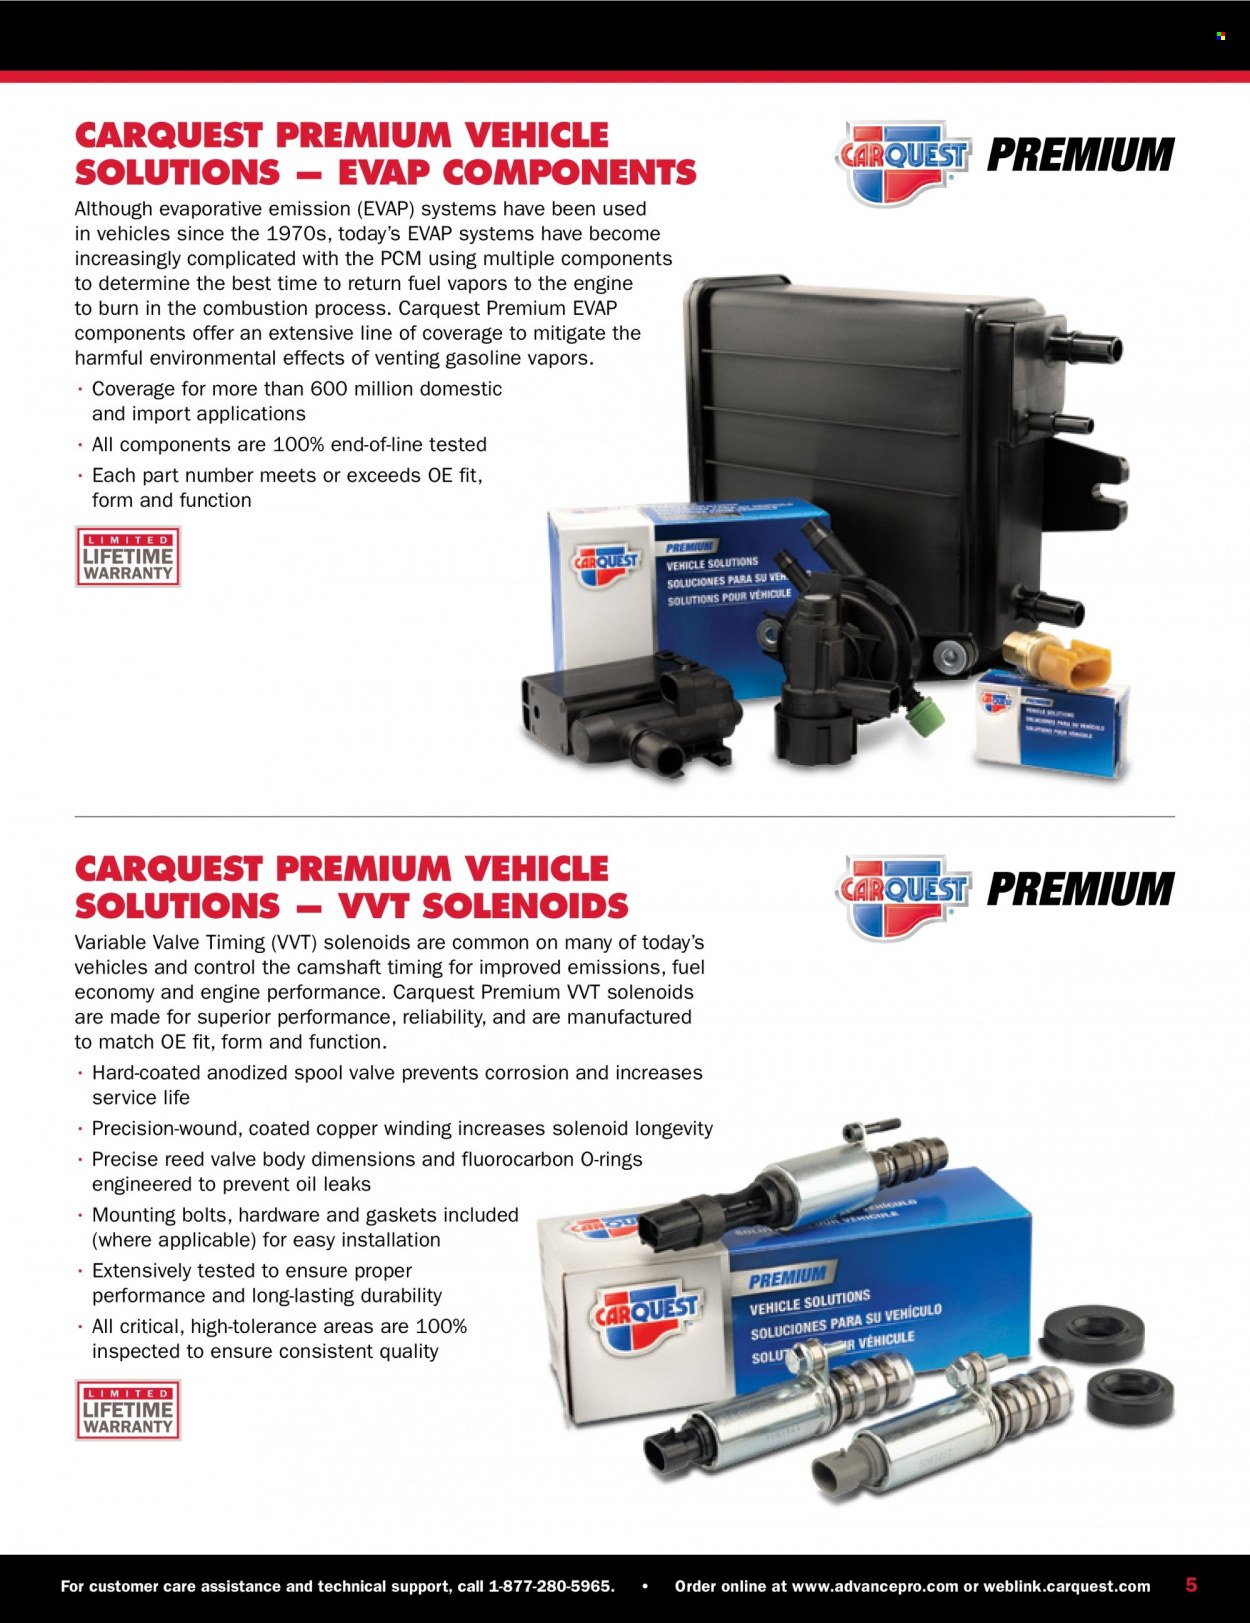 Carquest flyer . Page 5.